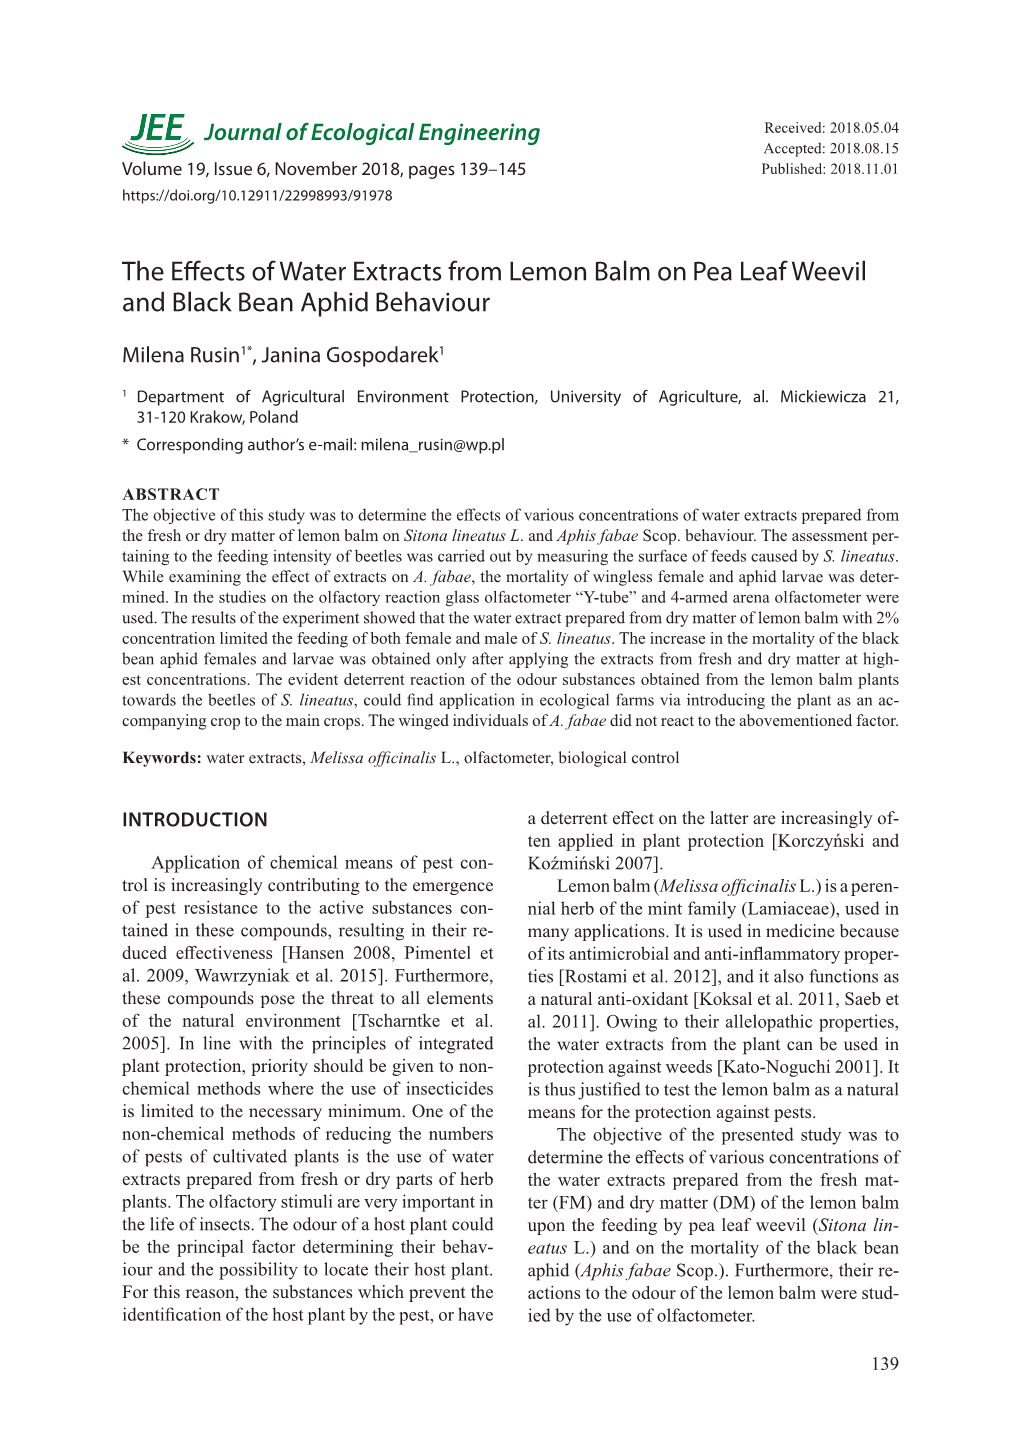 The Effects of Water Extracts from Lemon Balm Onpea Leaf Weevil